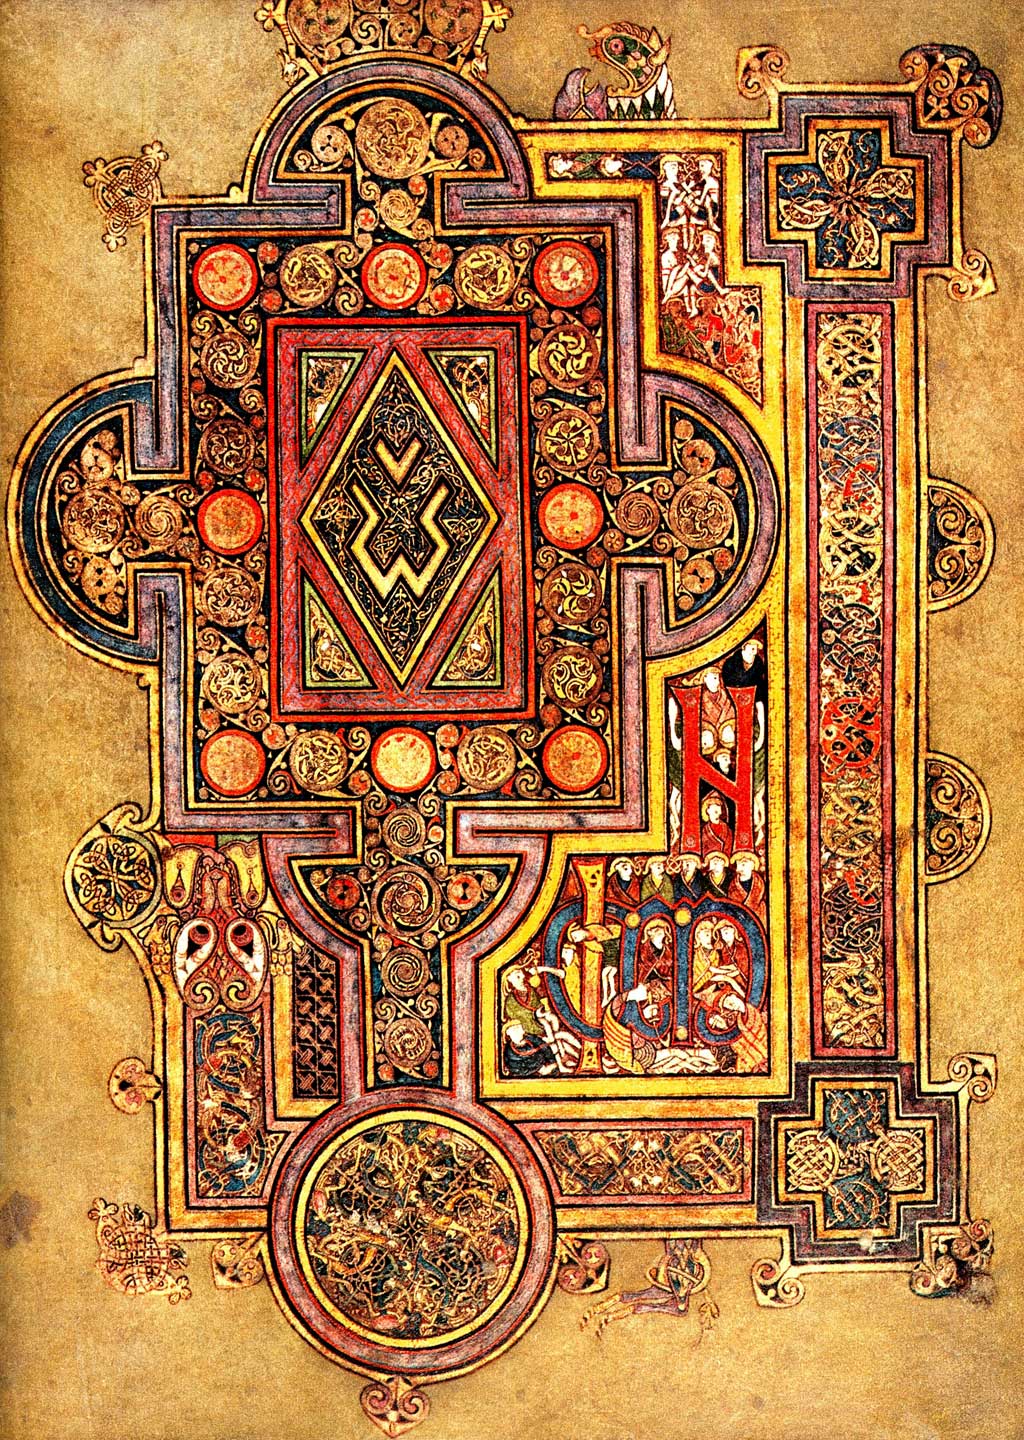 Old Roads Once Traveled: The Book of Kells